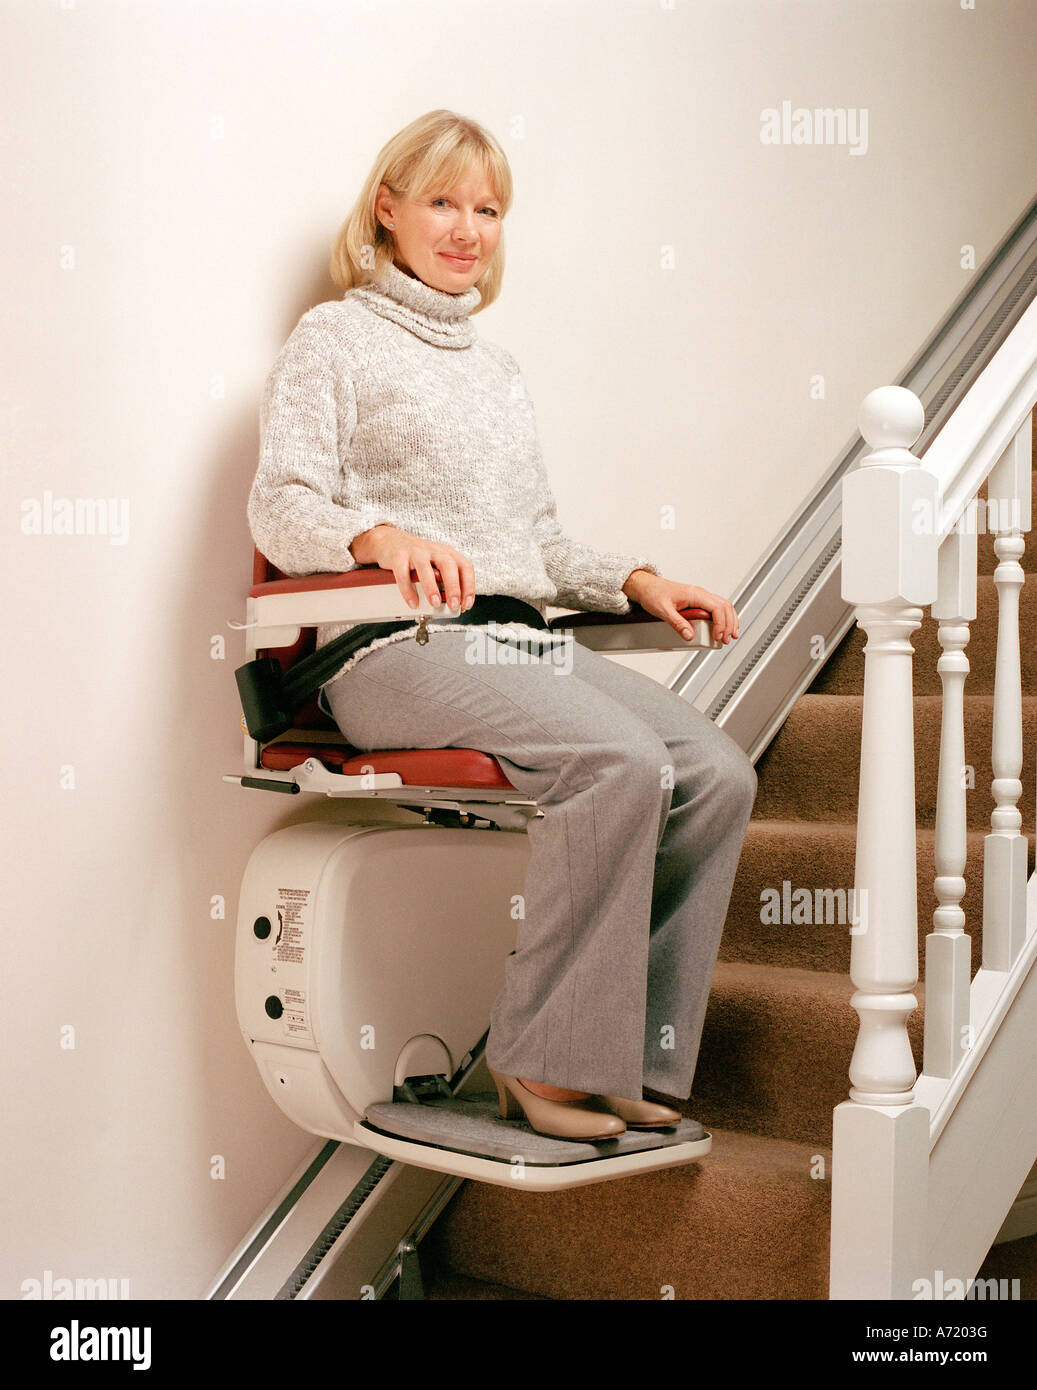 woman-using-stairlift-A7203G.jpg